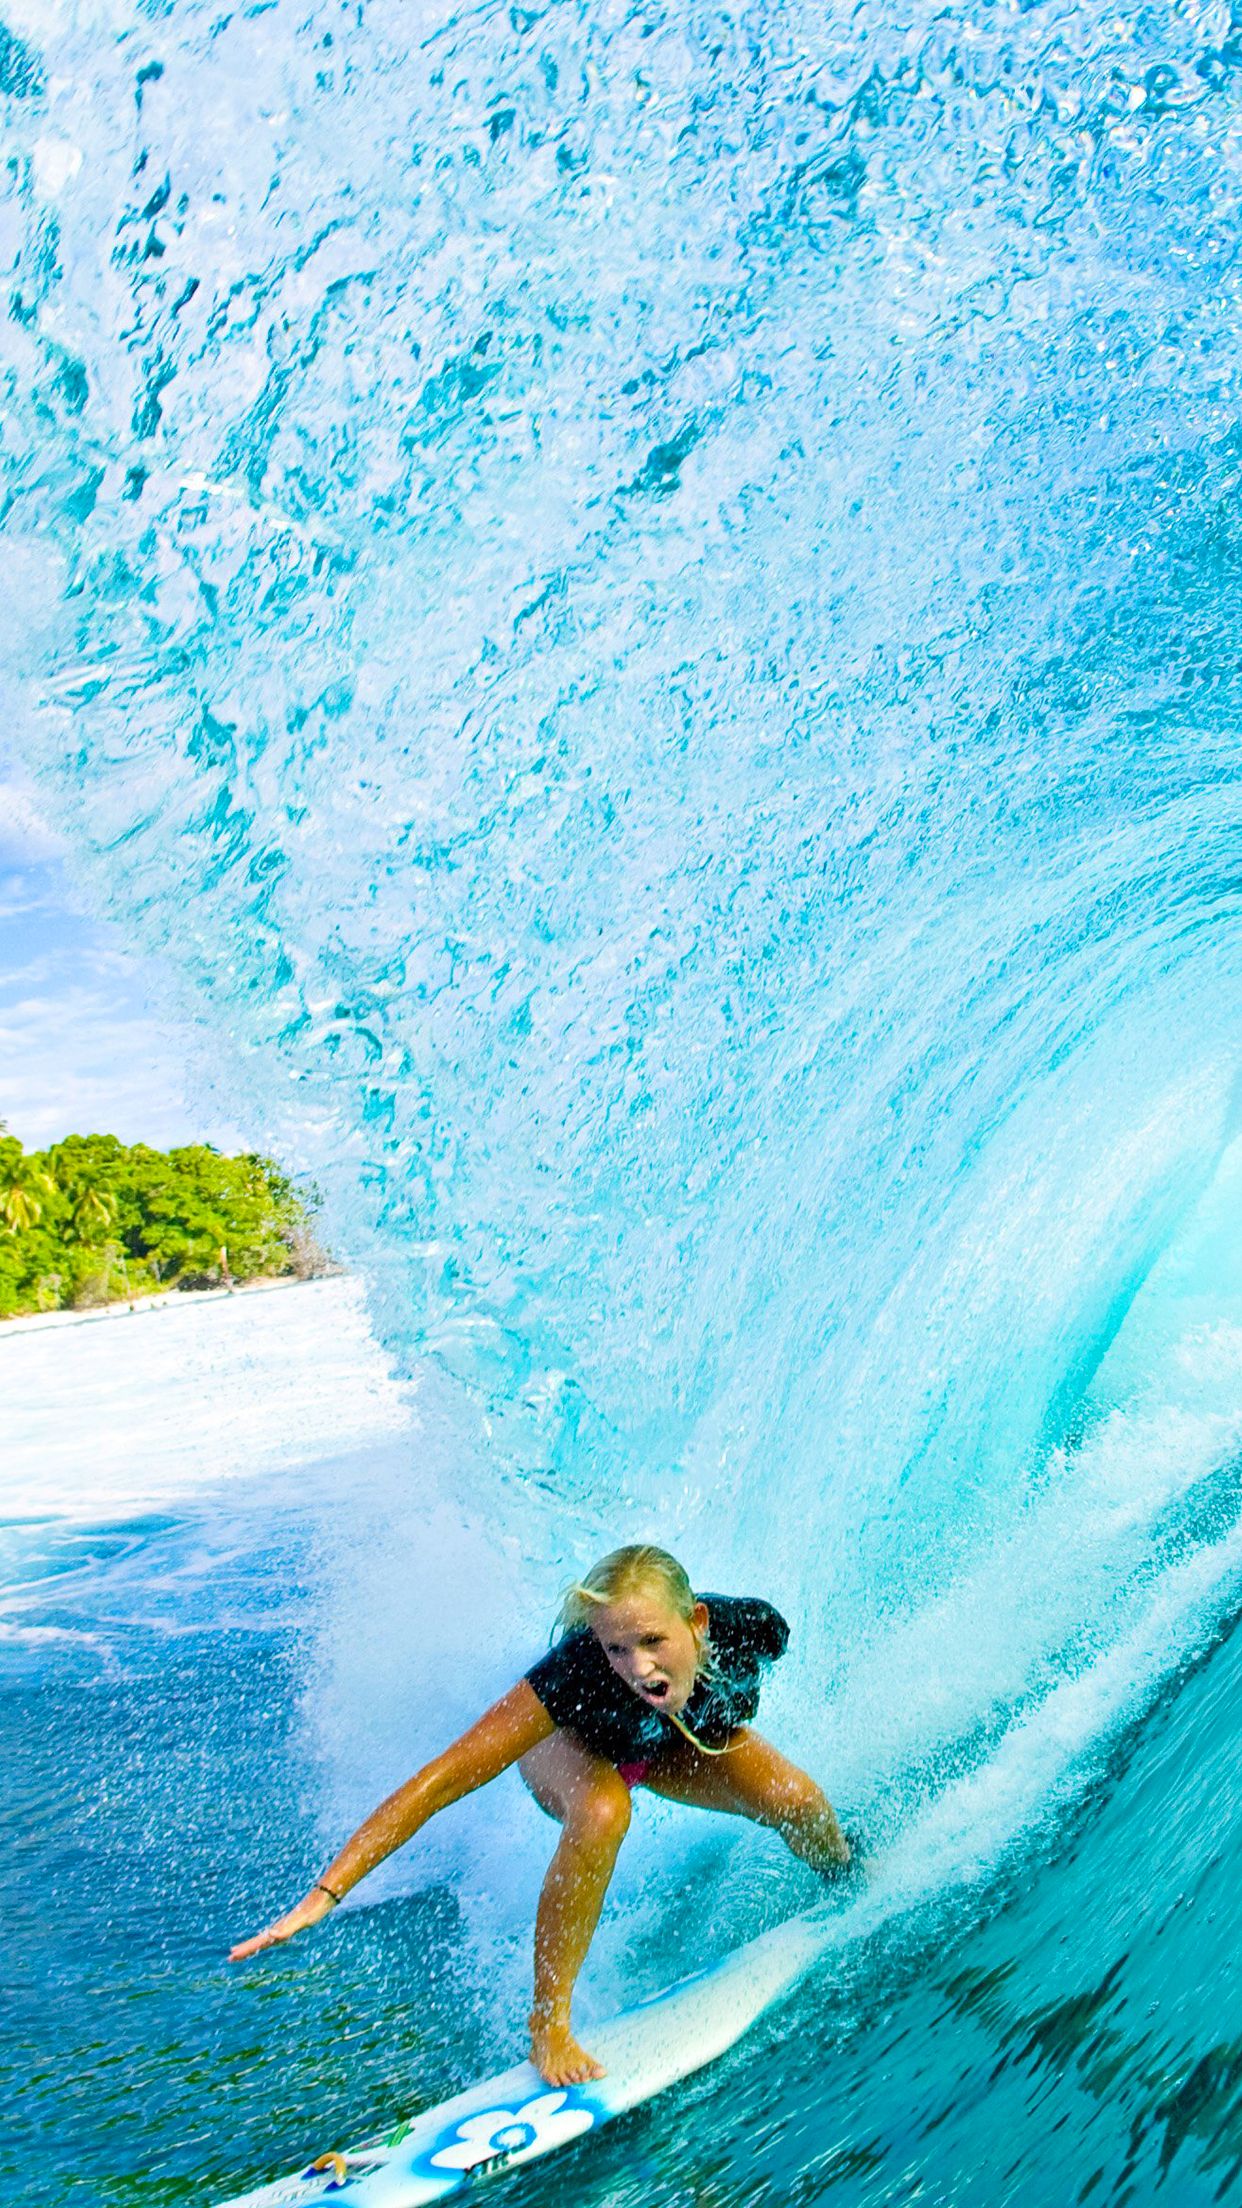 Surfing Girl Wave Wallpaper for iPhone Pro Max, X, 6